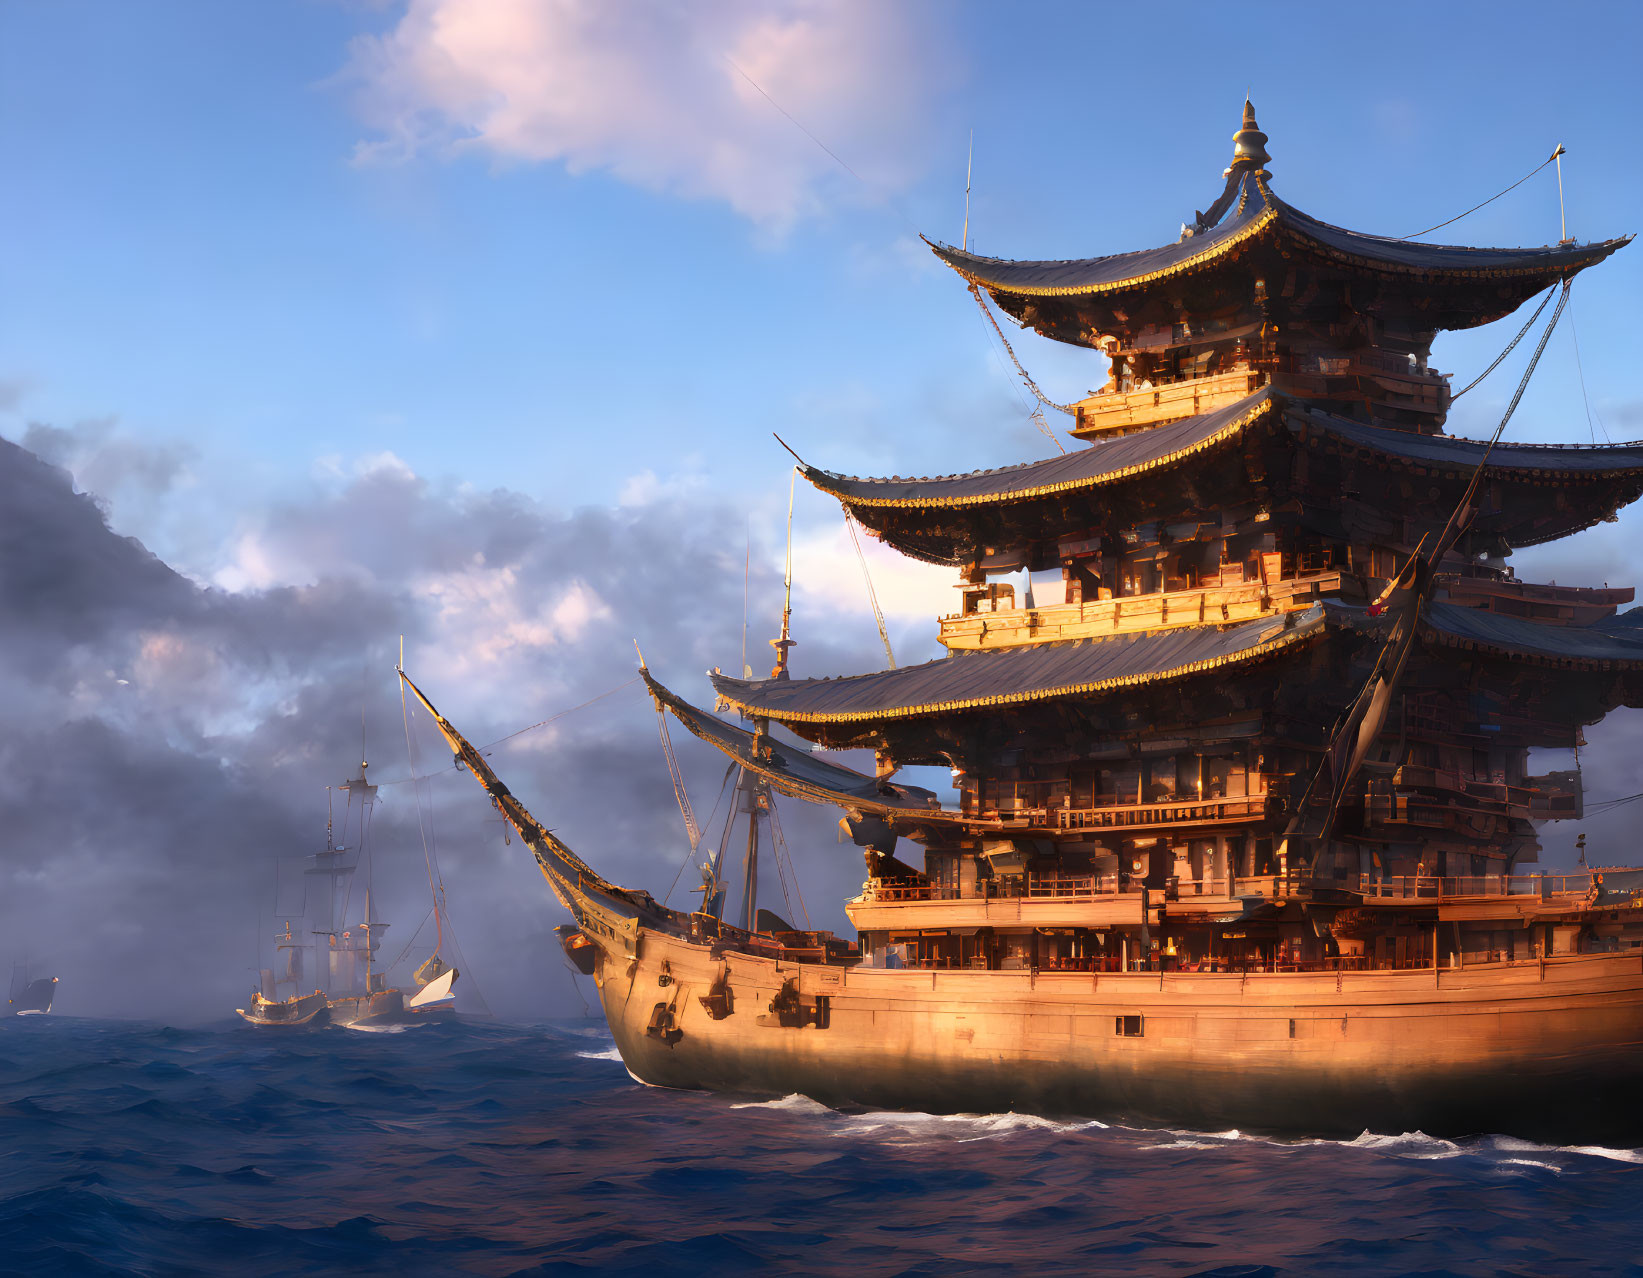 Traditional East Asian Ship Sailing on Ocean at Sunset